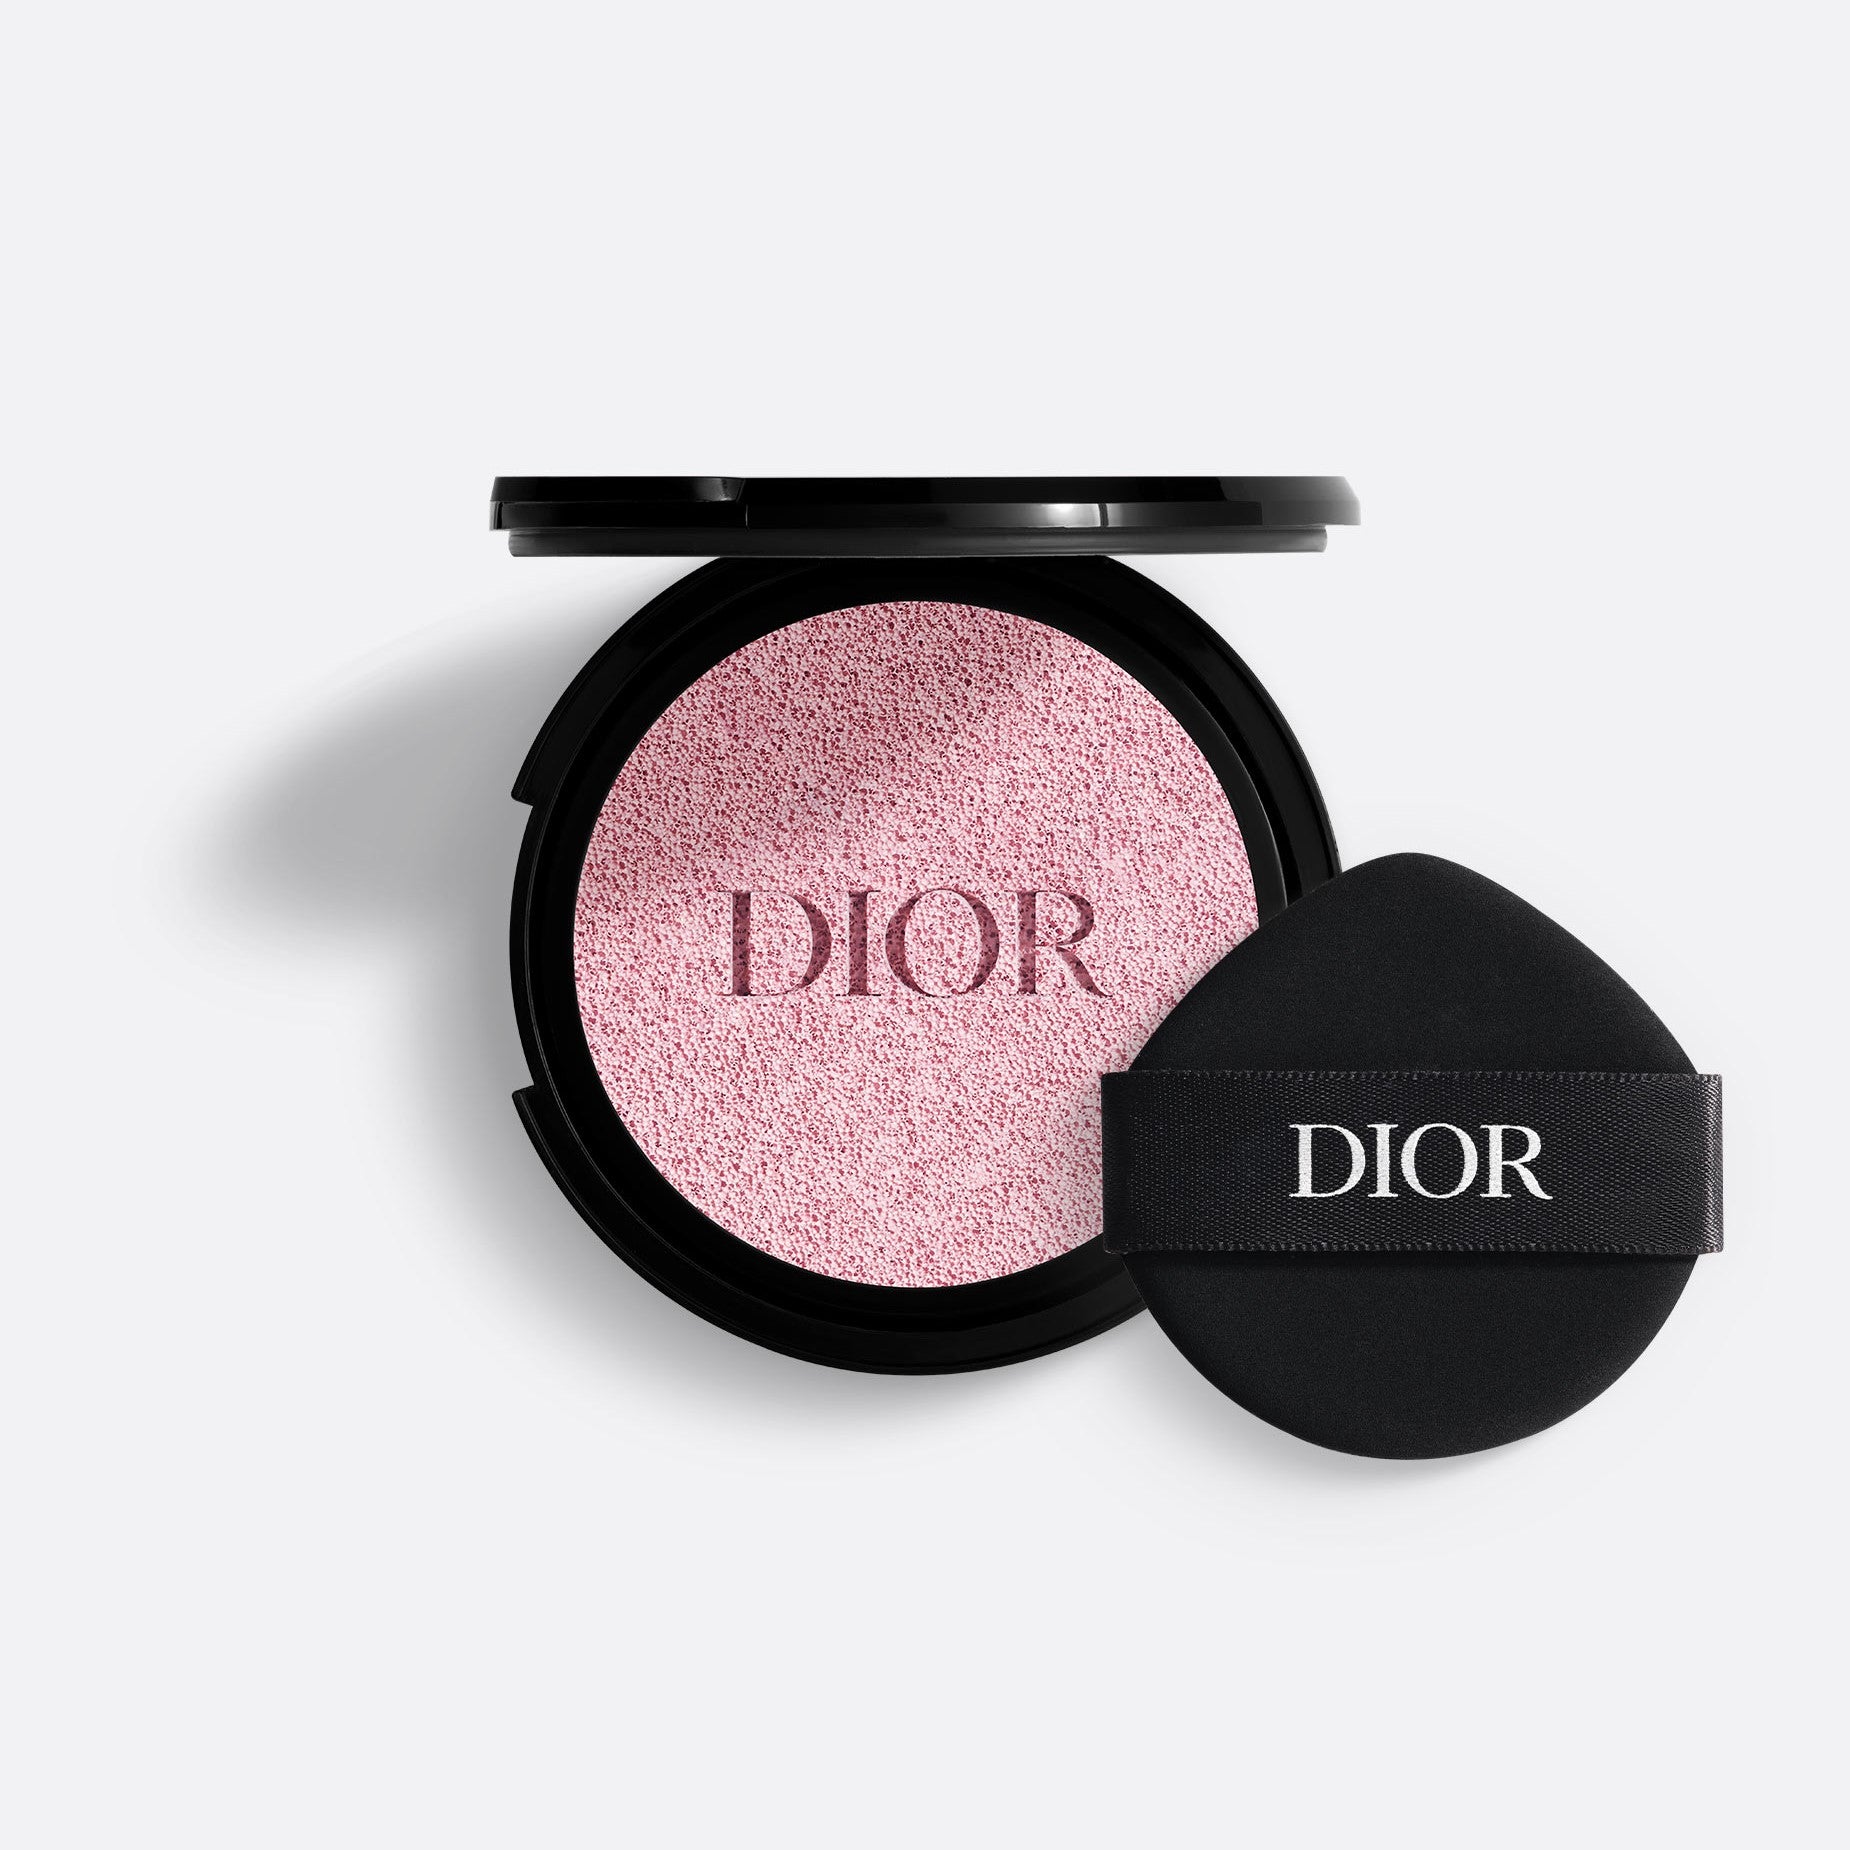 DIOR FOREVER SKIN GLOW TONE-UP REFILL | Dullness-Correcting Fresh Glow Makeup Base - Long Wear and 24hr Hydration